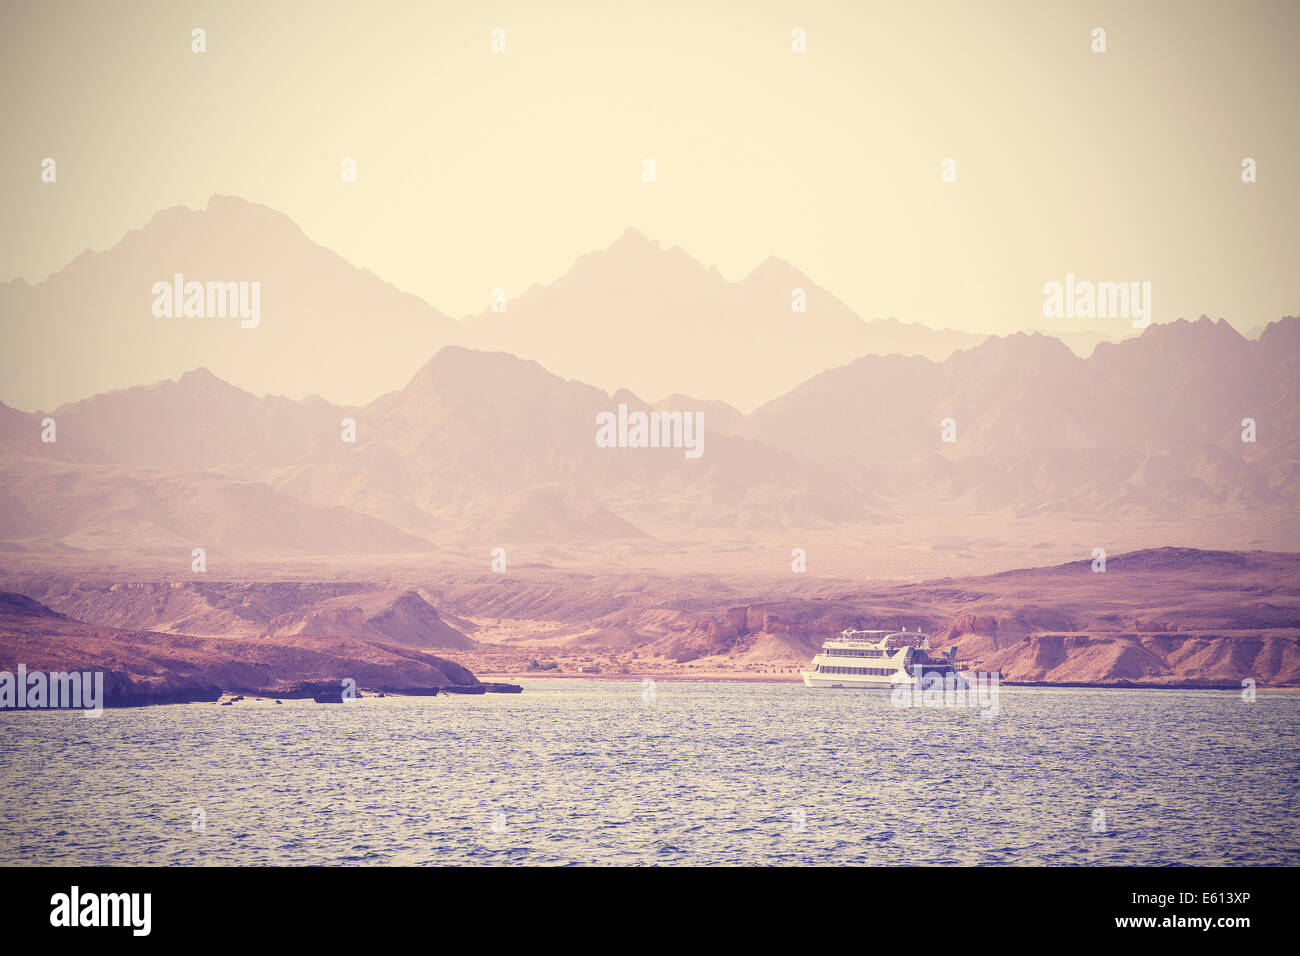 Vintage picture of a boat on the sea in Egypt. Stock Photo